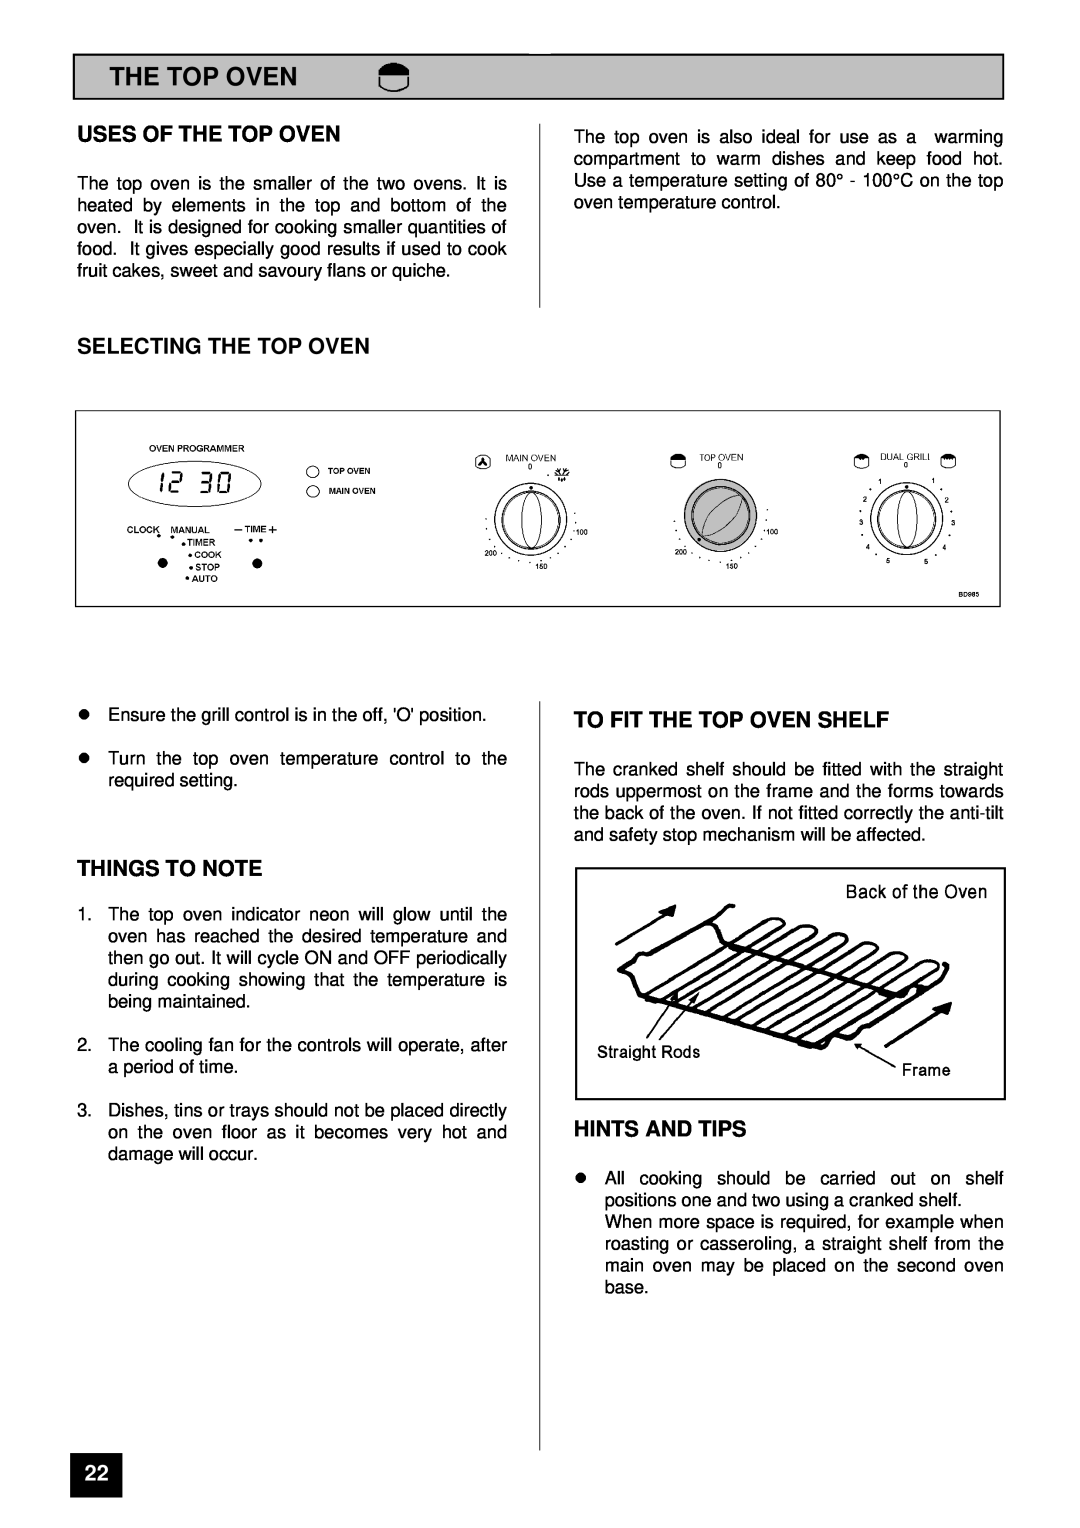 Tricity Bendix BD 985 Uses Of The Top Oven, Selecting The Top Oven, To Fit The Top Oven Shelf, Things To Note 